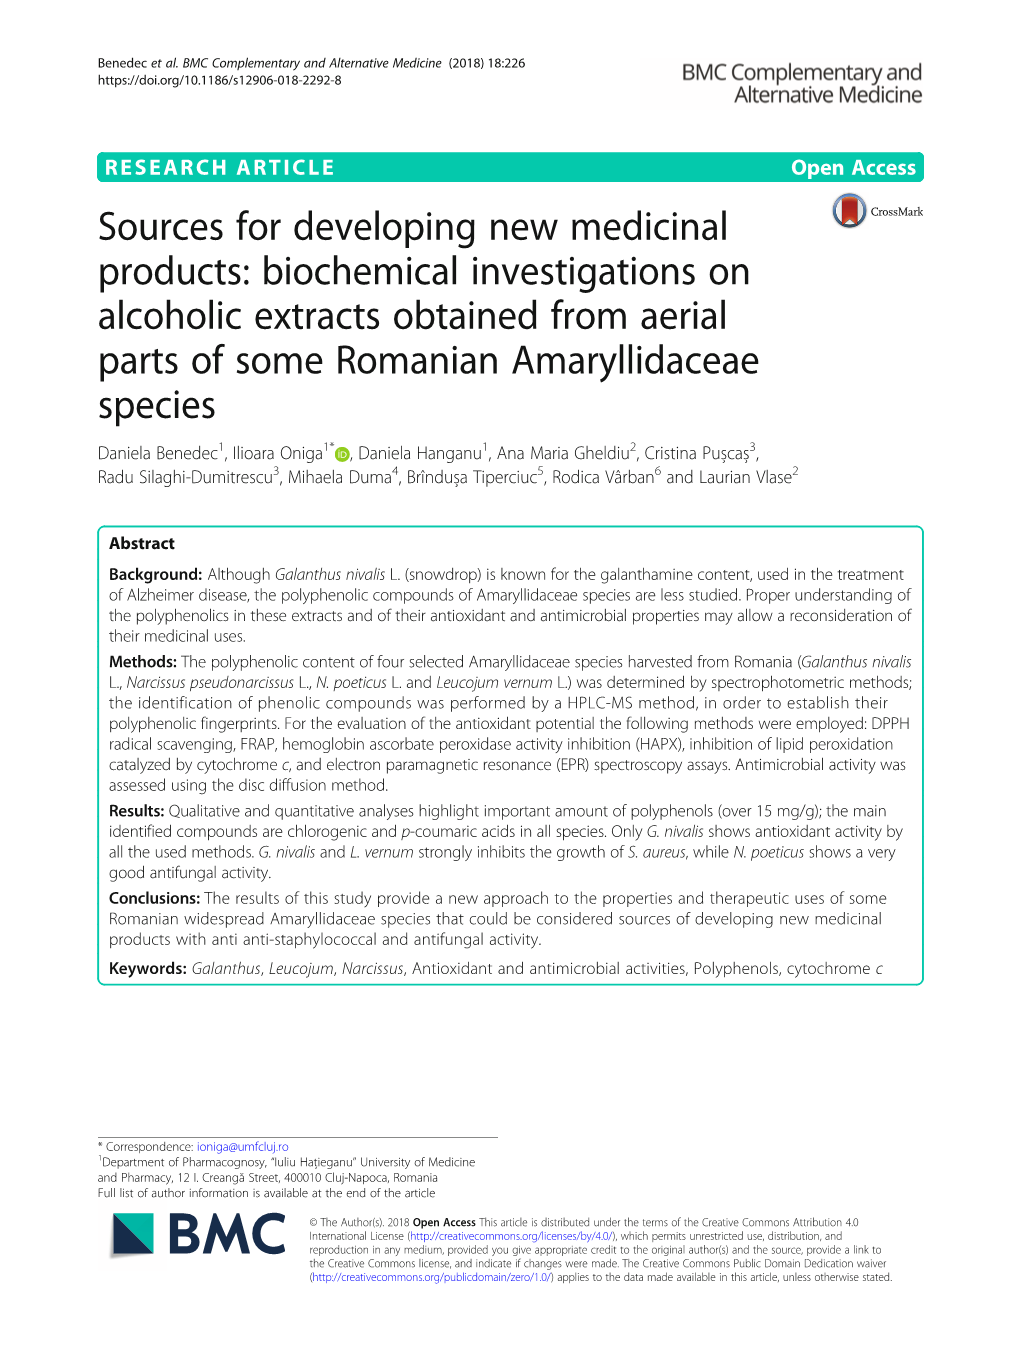 Sources for Developing New Medicinal Products